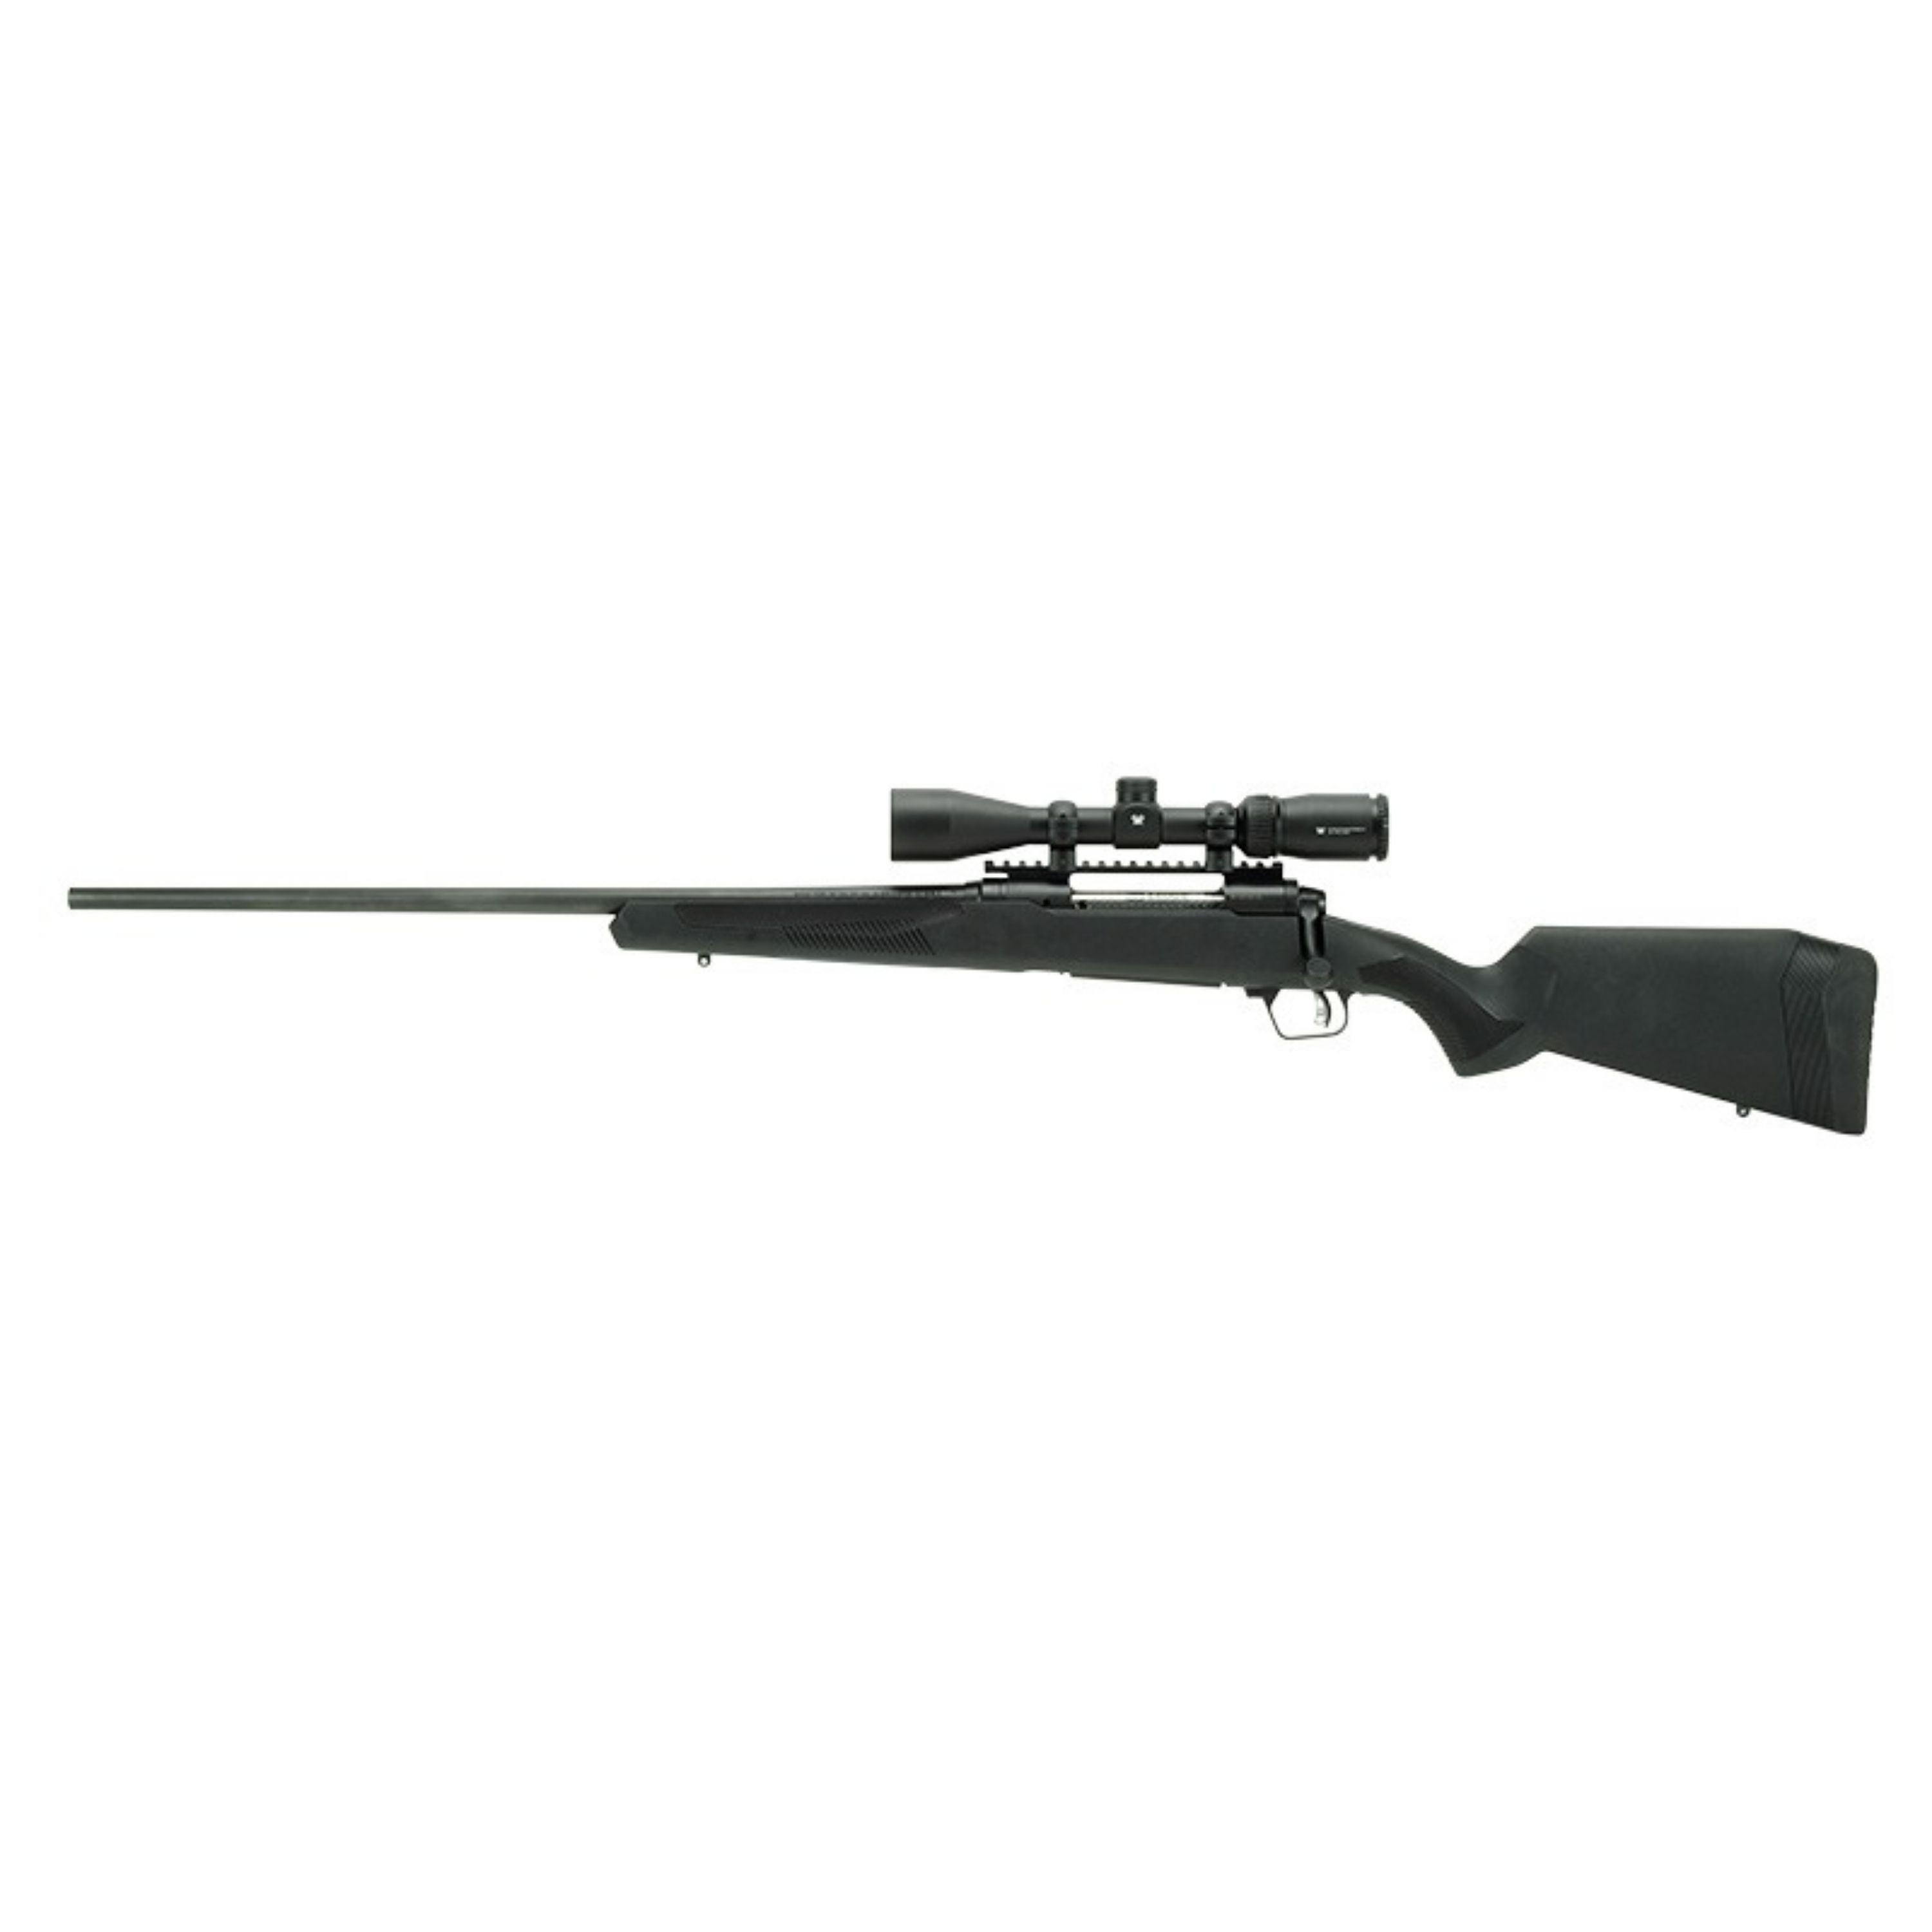 "110 Apex Hunter" Bolt action left-handed rifle with scope